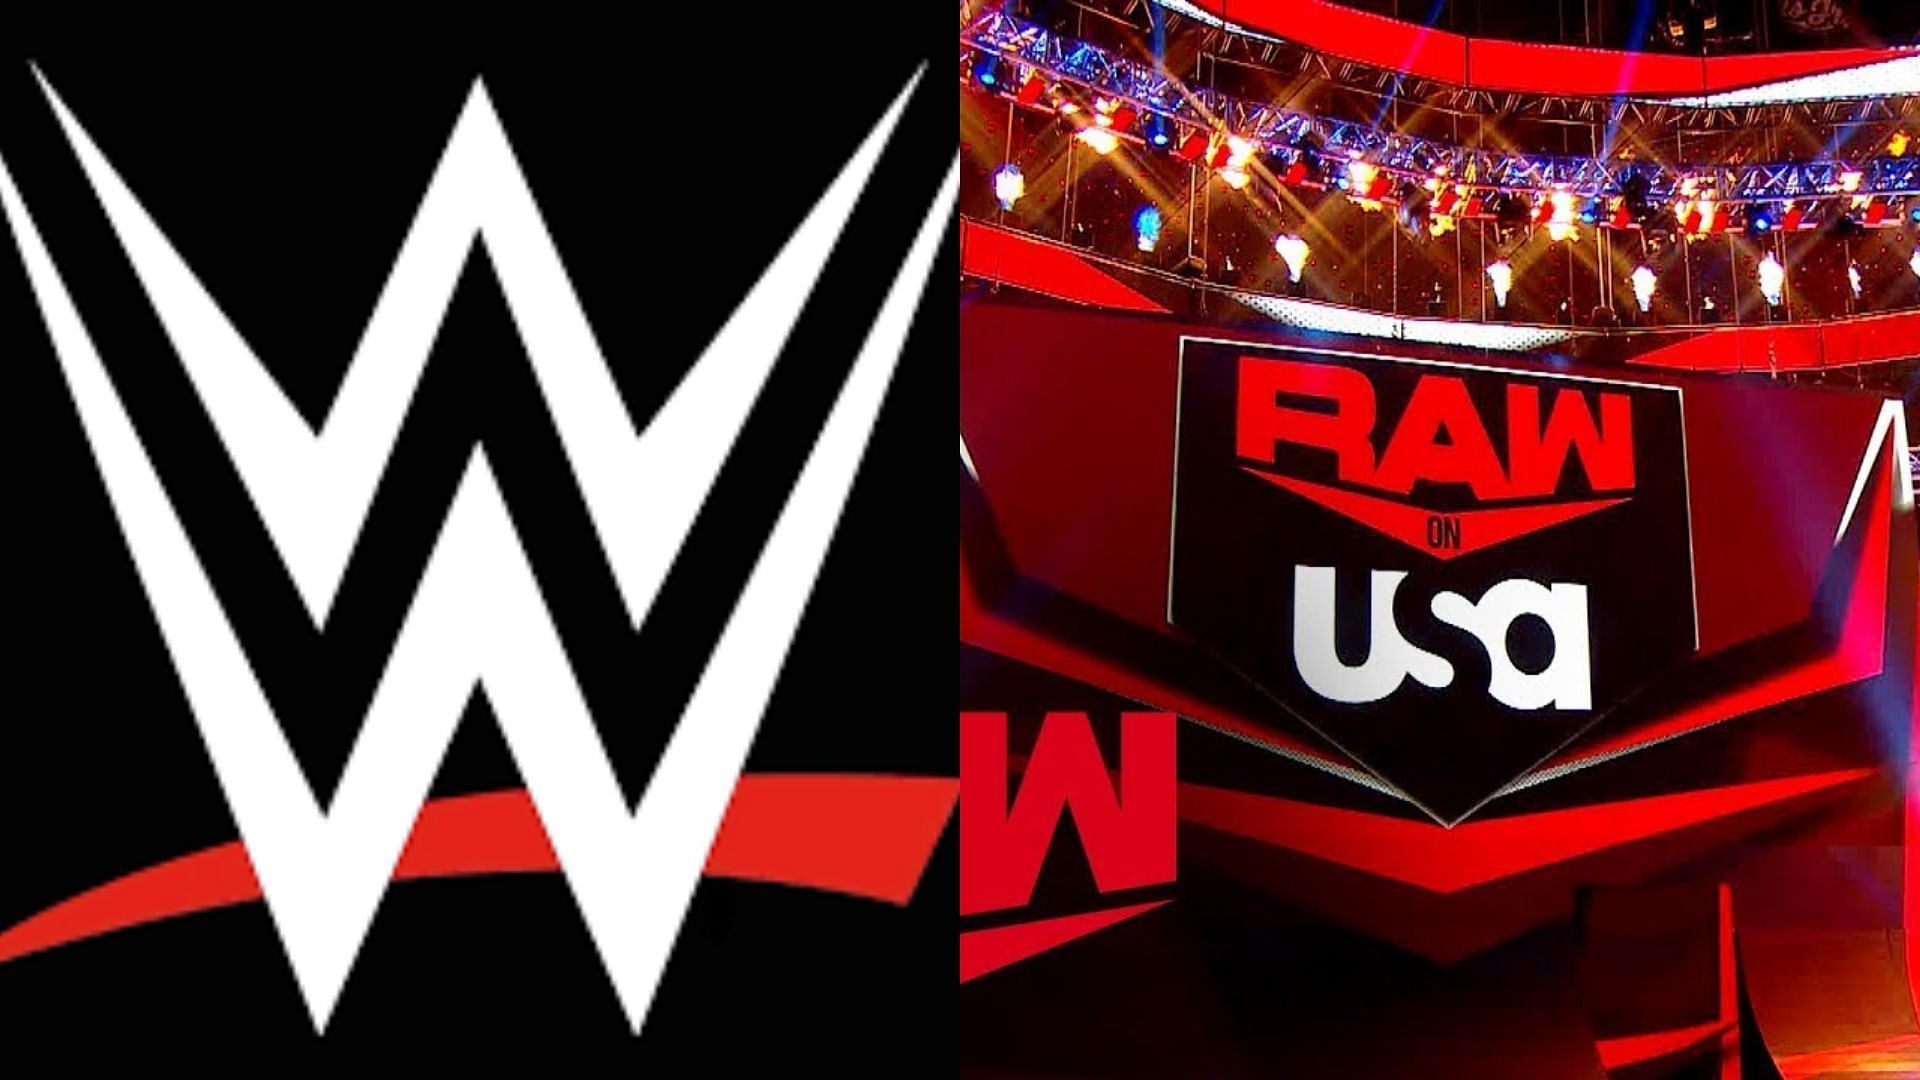 The WWE stars were spotted at RAW this week